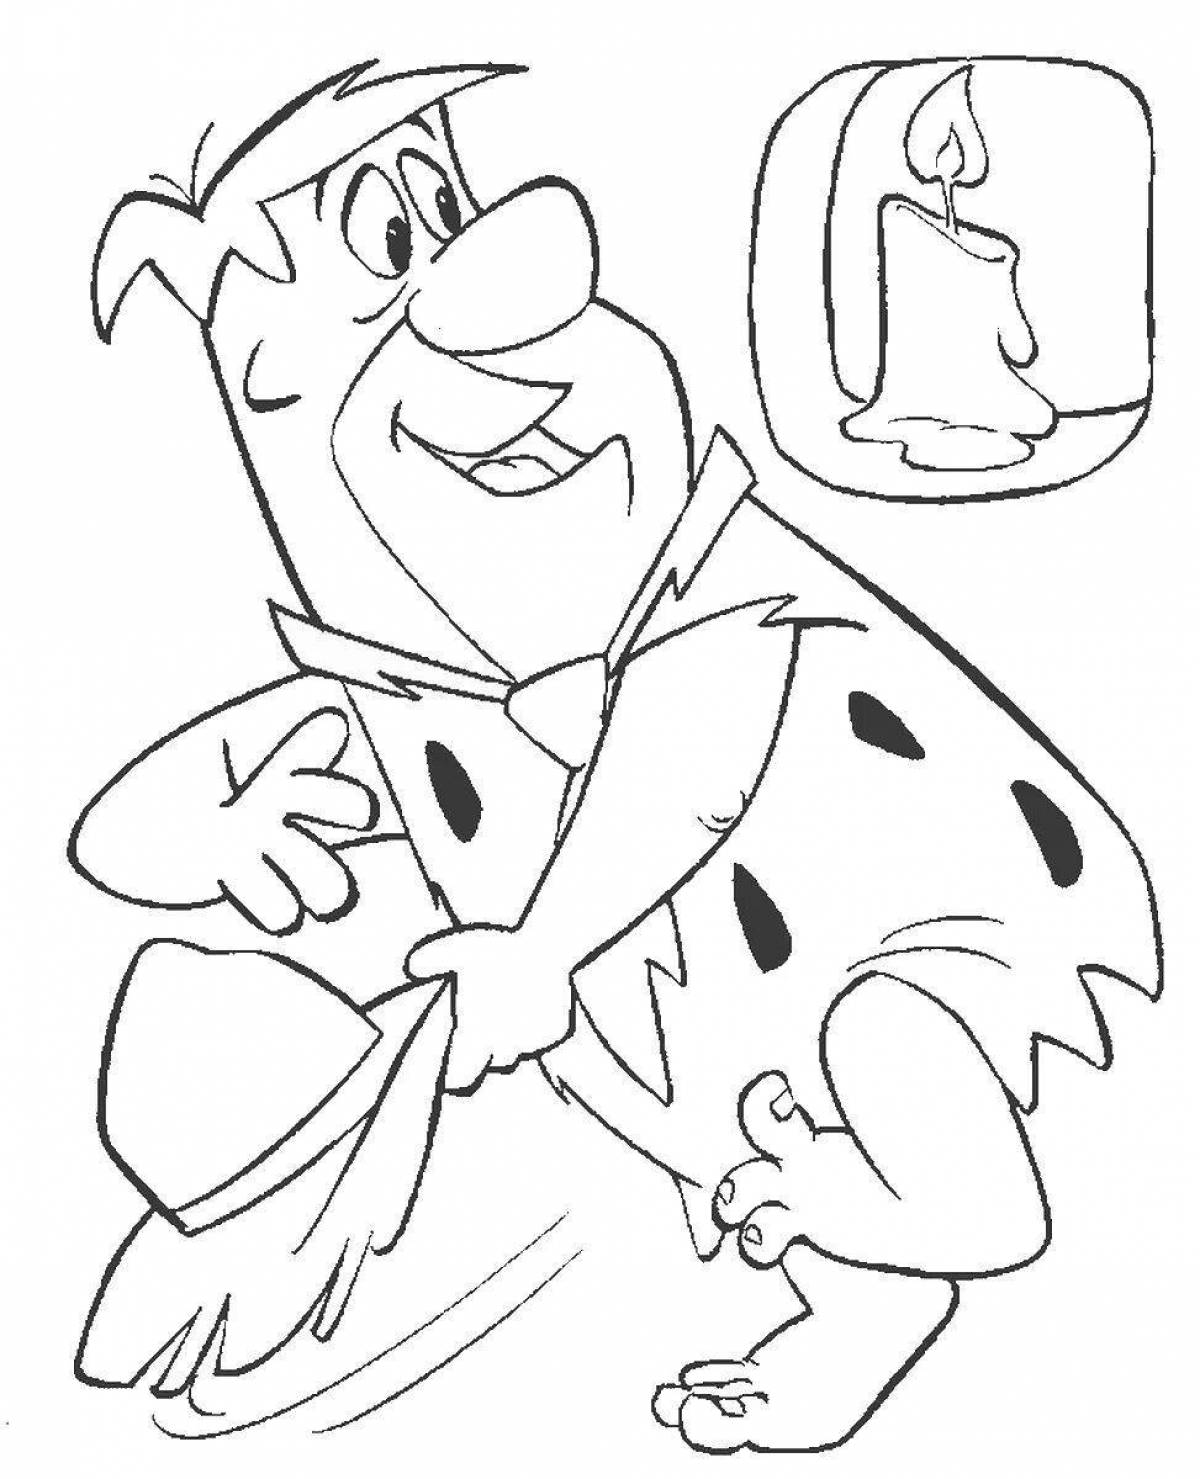 Fred flintstone's vibrant coloring page